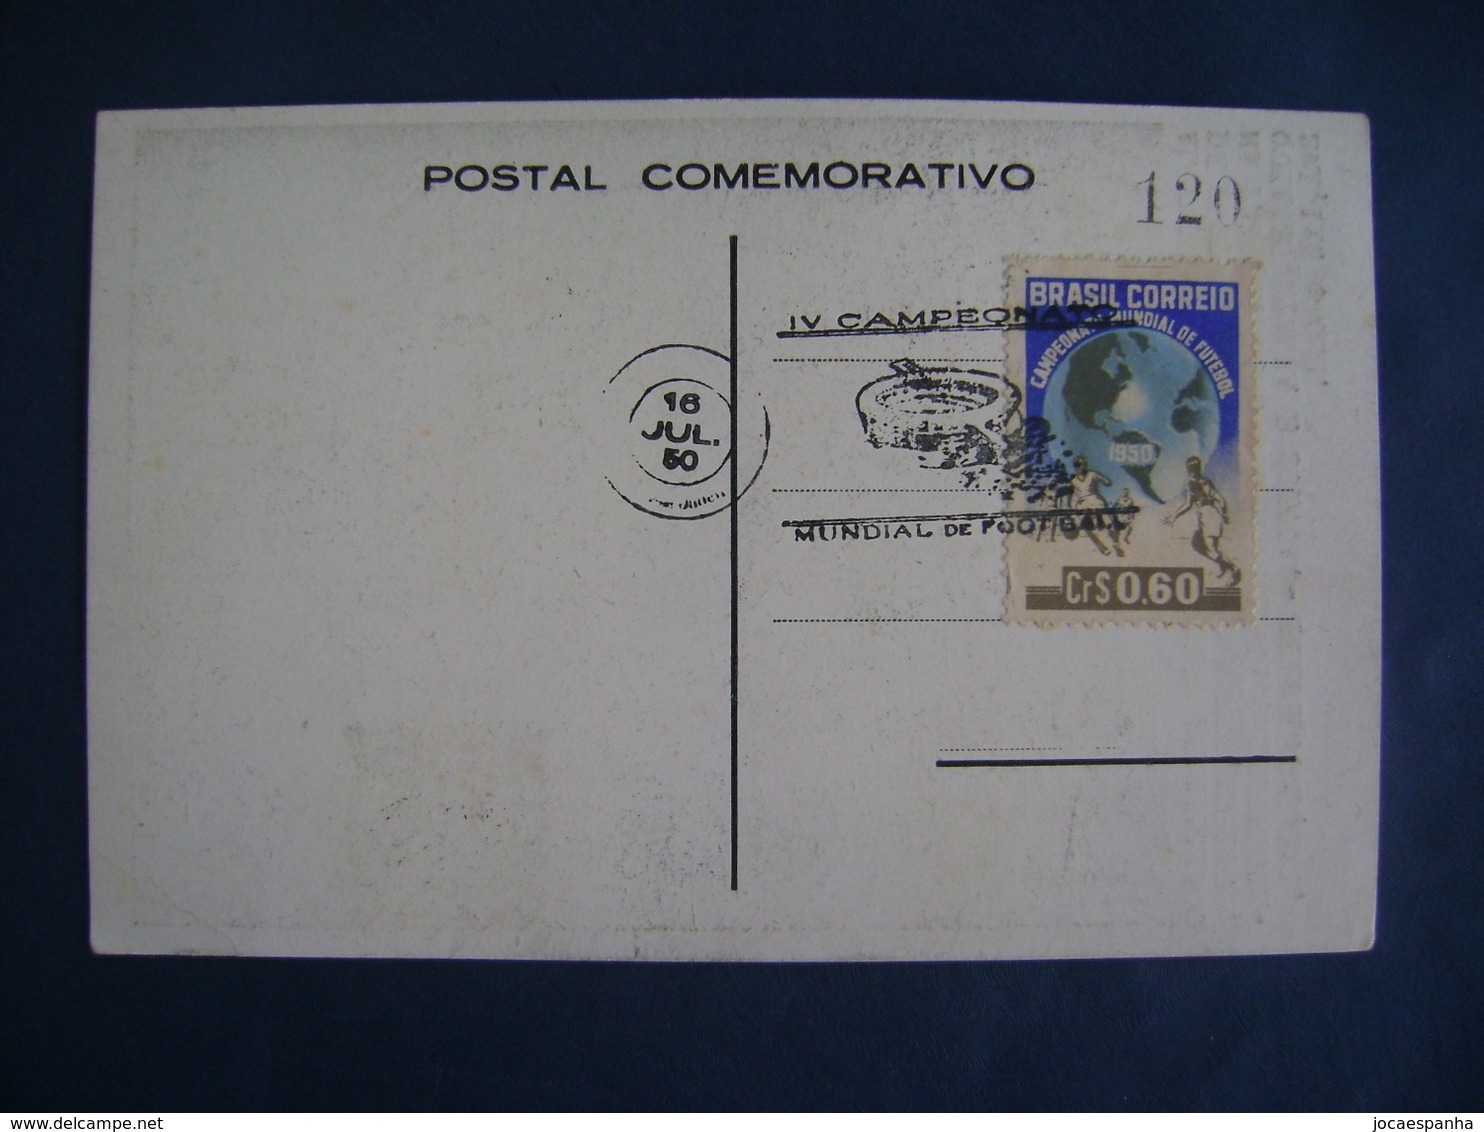 BRAZIL - POST CARD IN WHITE COLOR, SOME PLAYERS OF THE III CUP OF THE 1938 SOCCER WORLD IN FRANCE IN THE STATE - Football